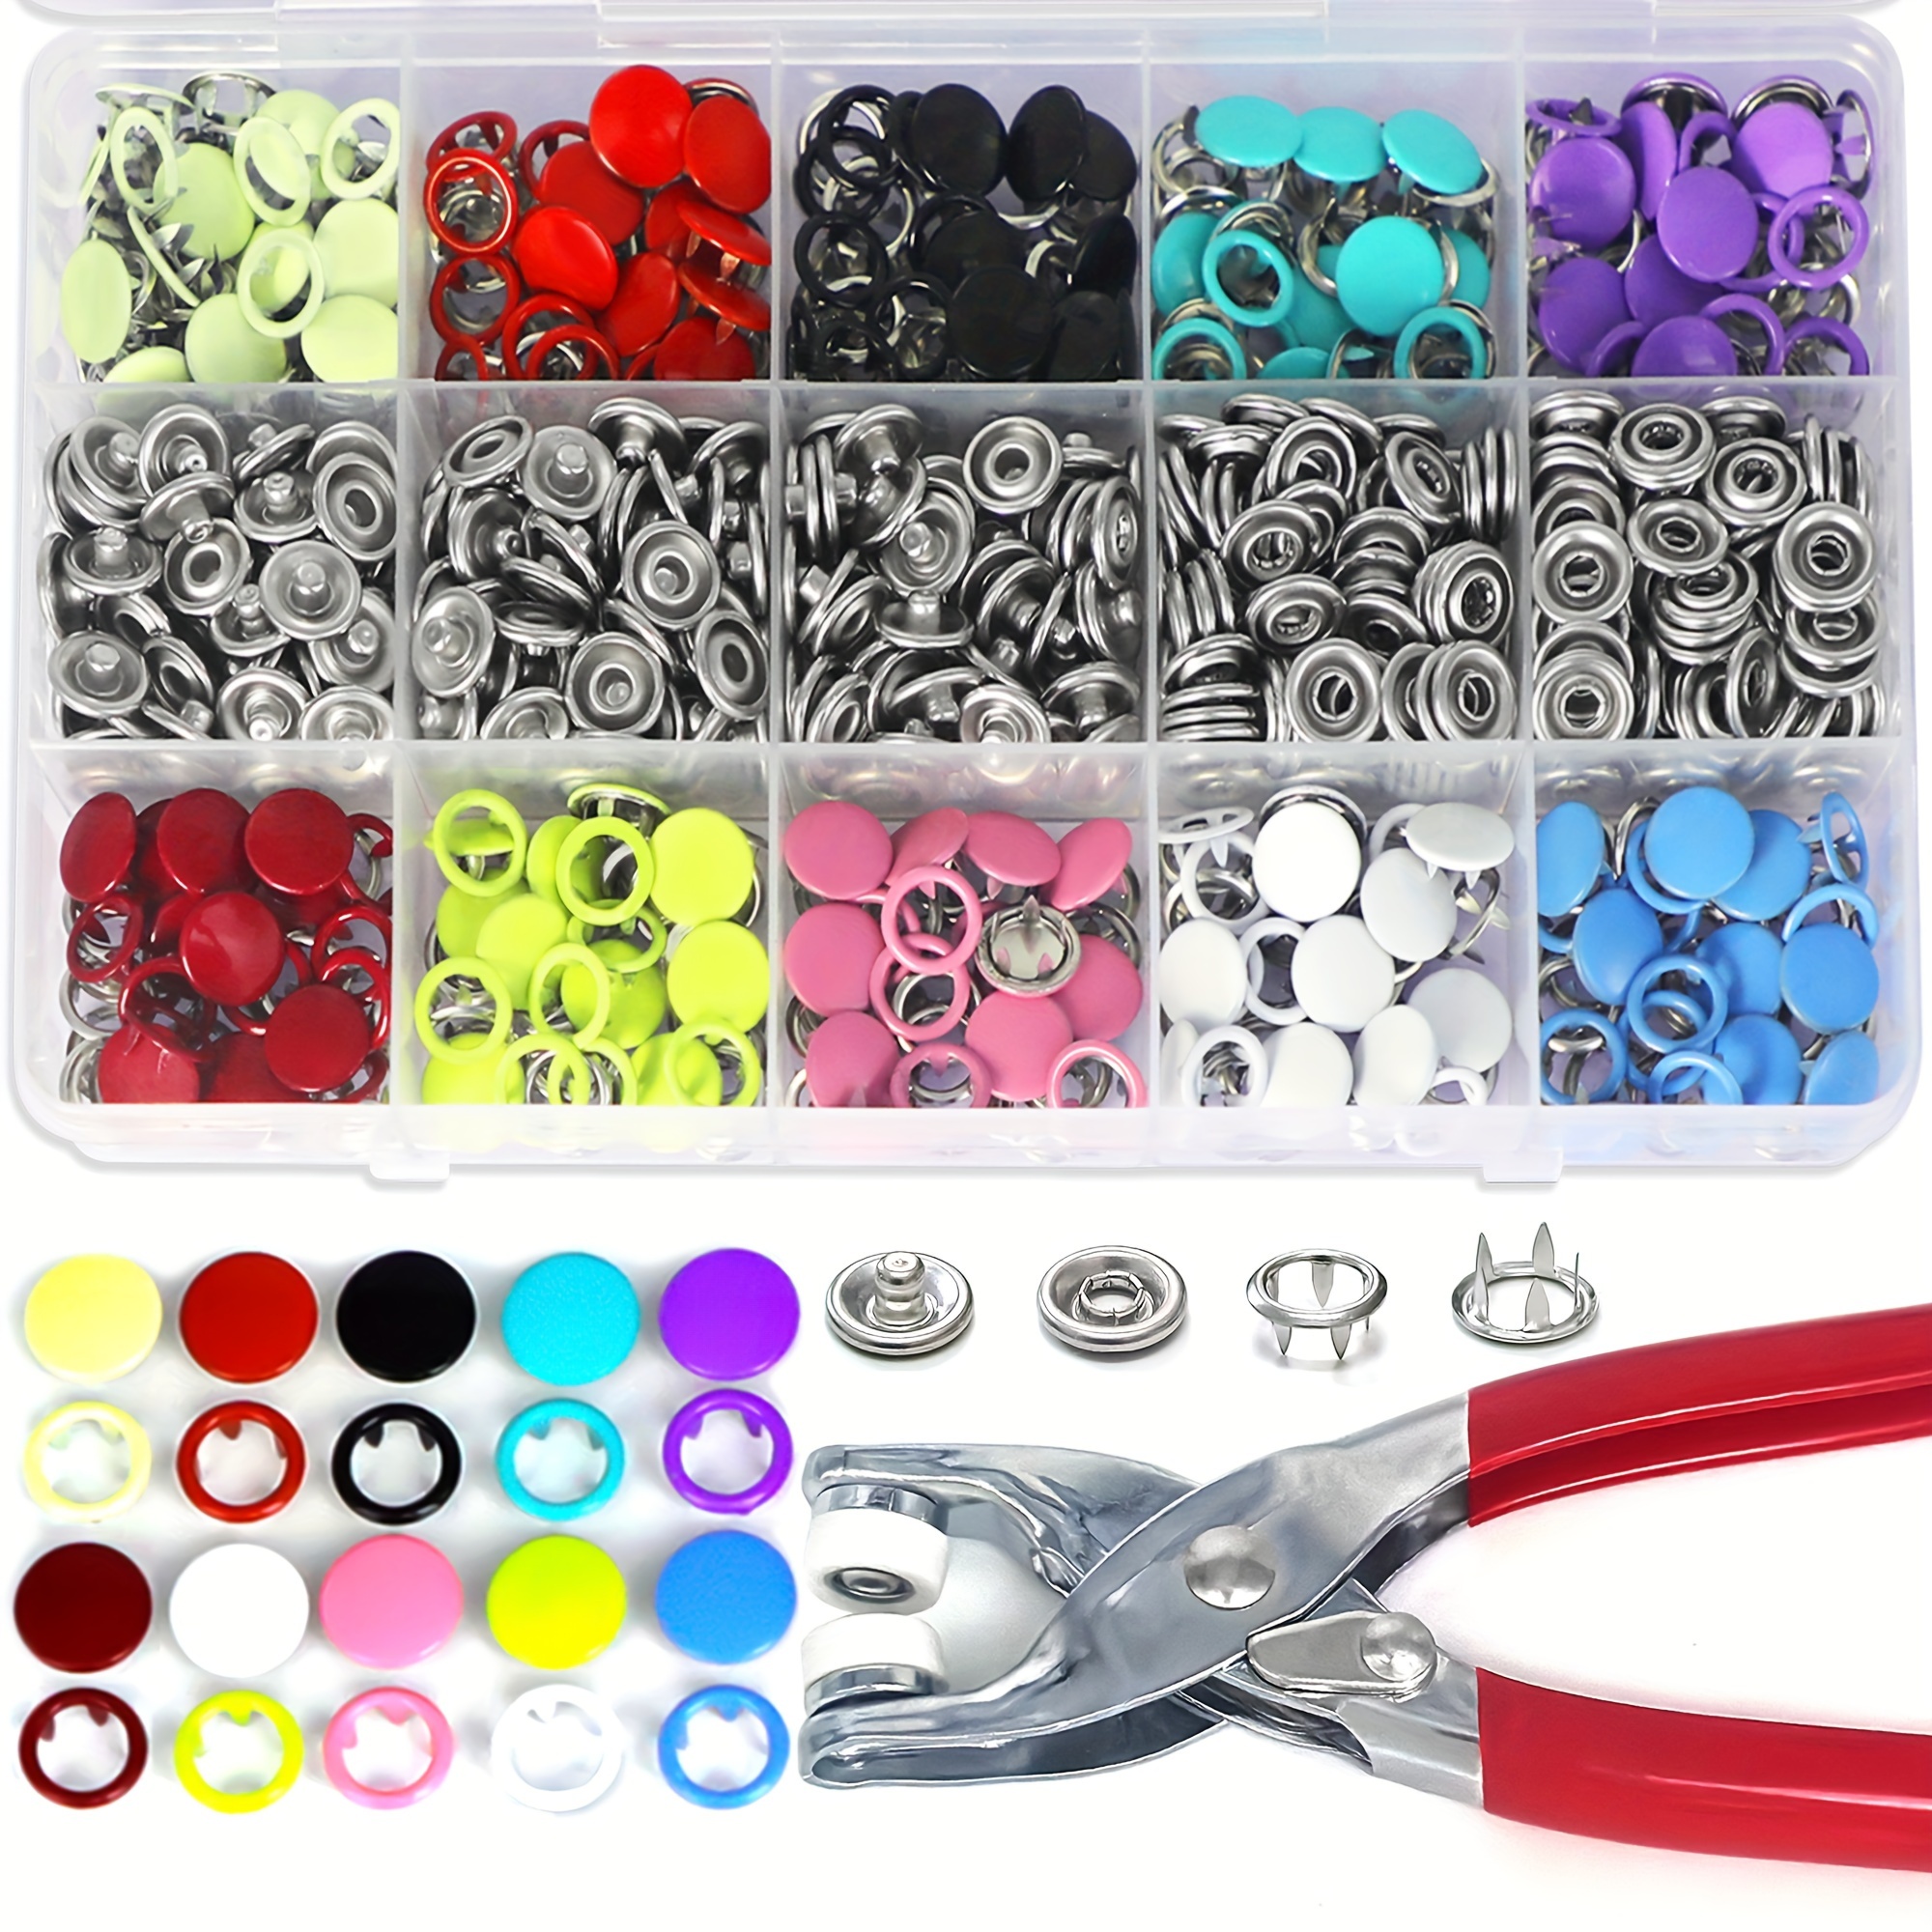 

200sets Metal Snap Button Kit - Snap On Buttons & Snap Fastener Tool - 9.5mm Colorful Metal Snaps Buttons Snap Closures Sewing Snaps For Clothing Leather Crafting